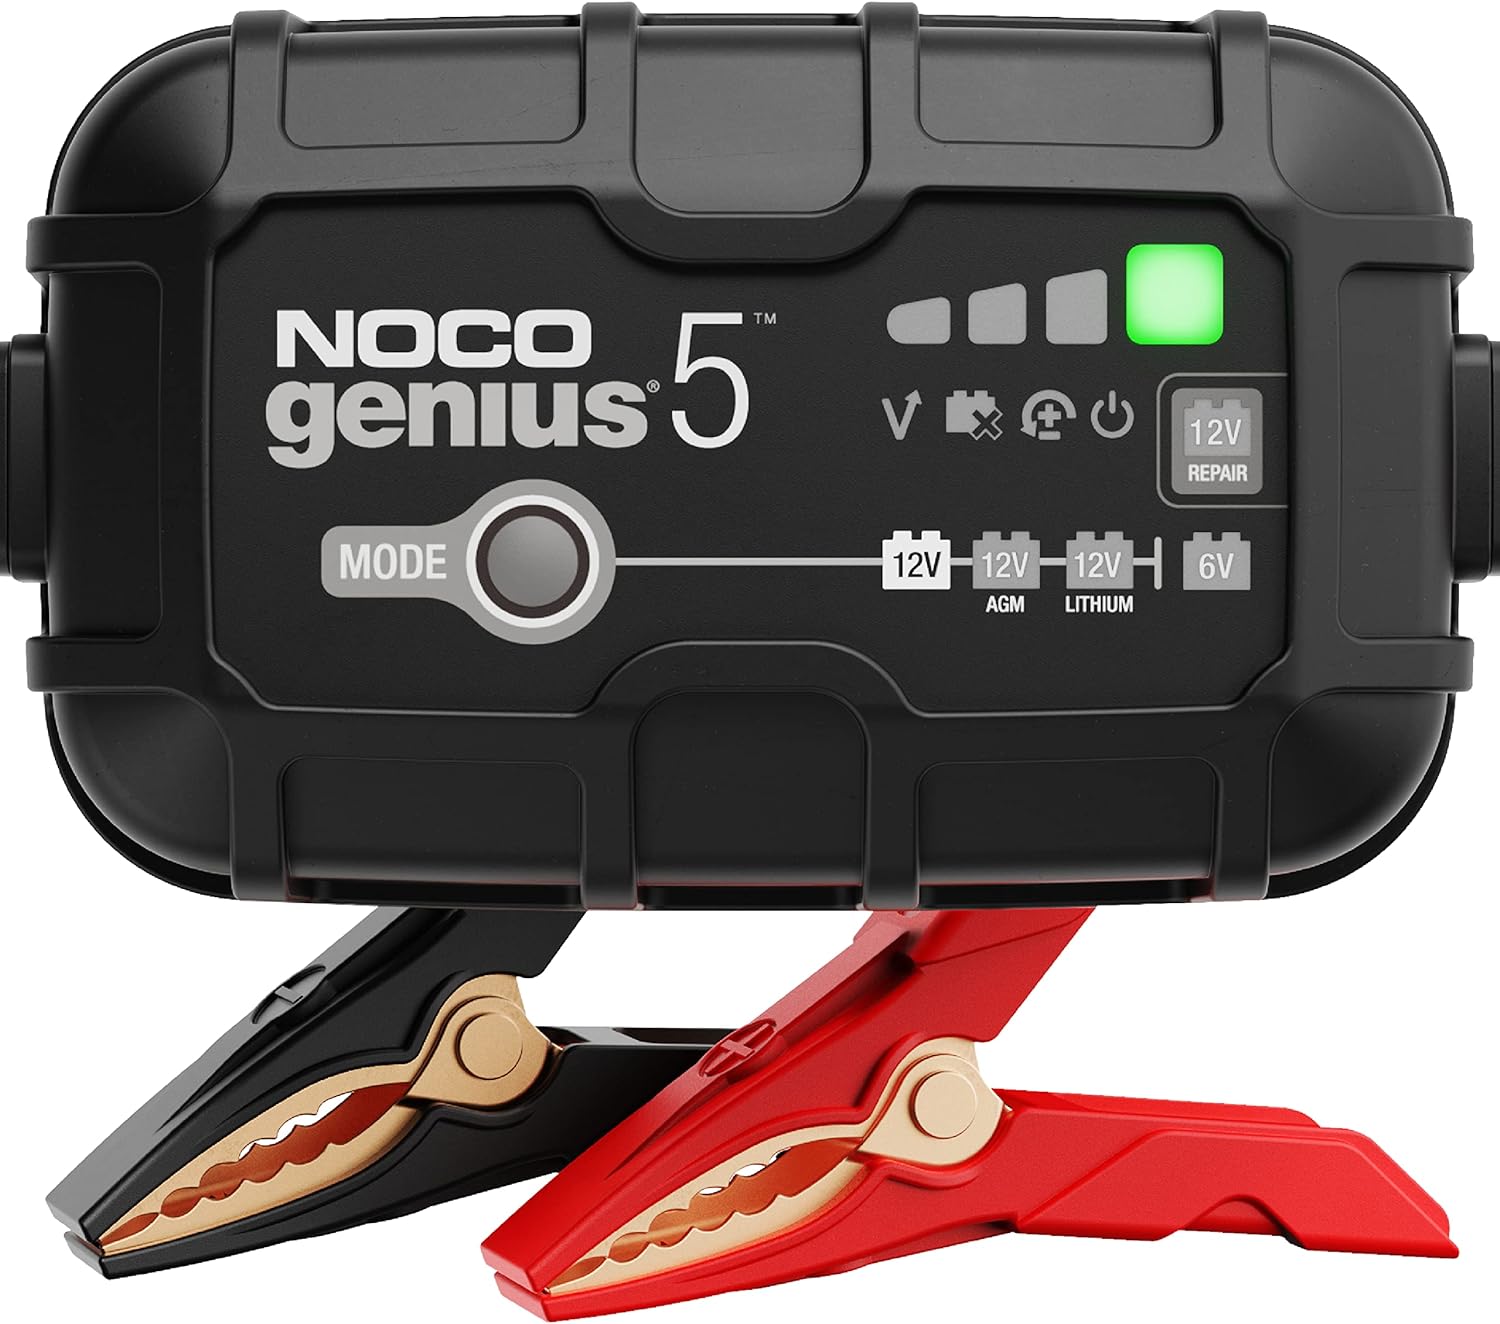 NOCO GENIUS5, 5A Smart Car Battery Charger, 6V and 12V Automotive Charger, Battery Maintainer, Trickle Charger, Float Charger and Desulfator for Motorcycle, ATV, Lithium and Deep Cycle Batteries - NOCO GENIUS5 Battery Charger Review